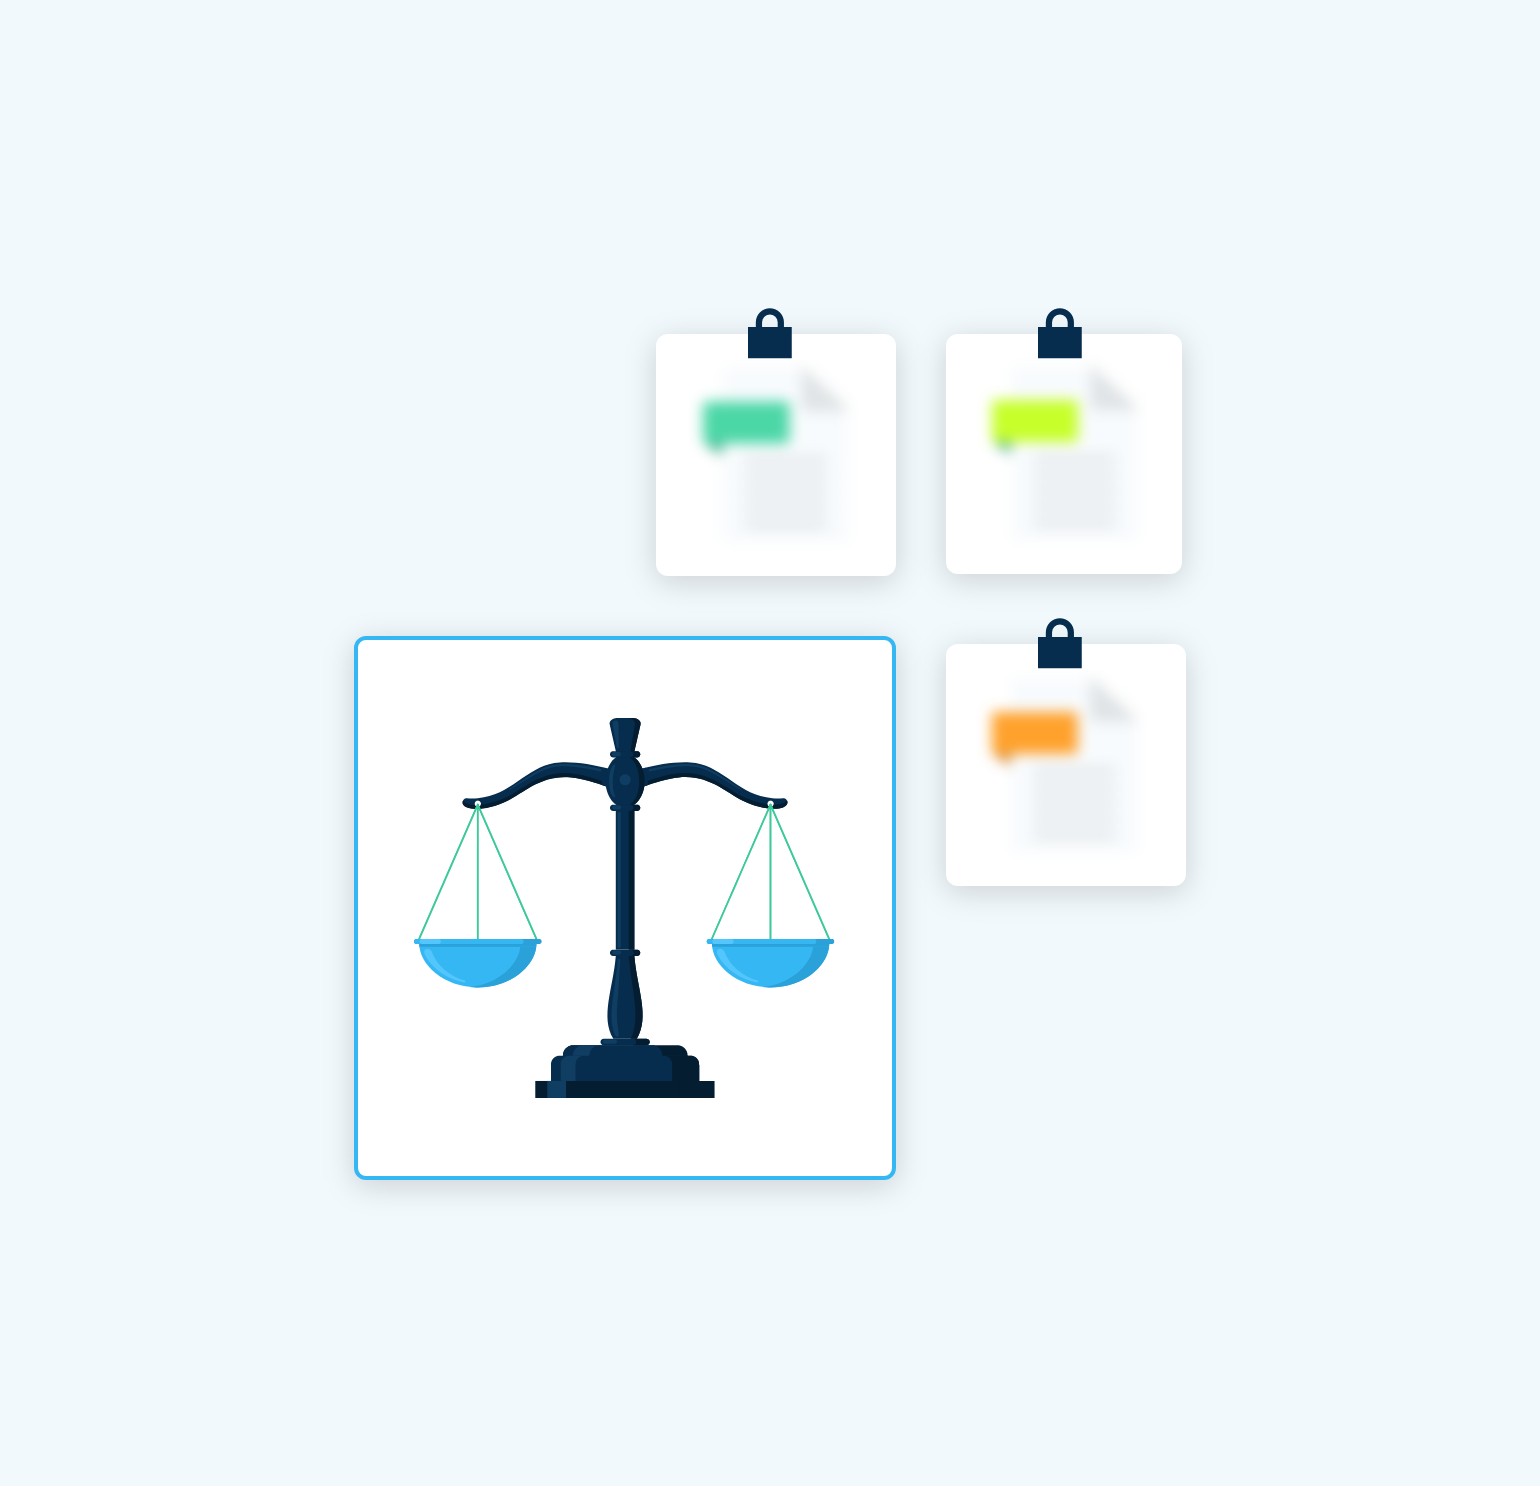 Scales icon selected in a menu of locked and blurred squares